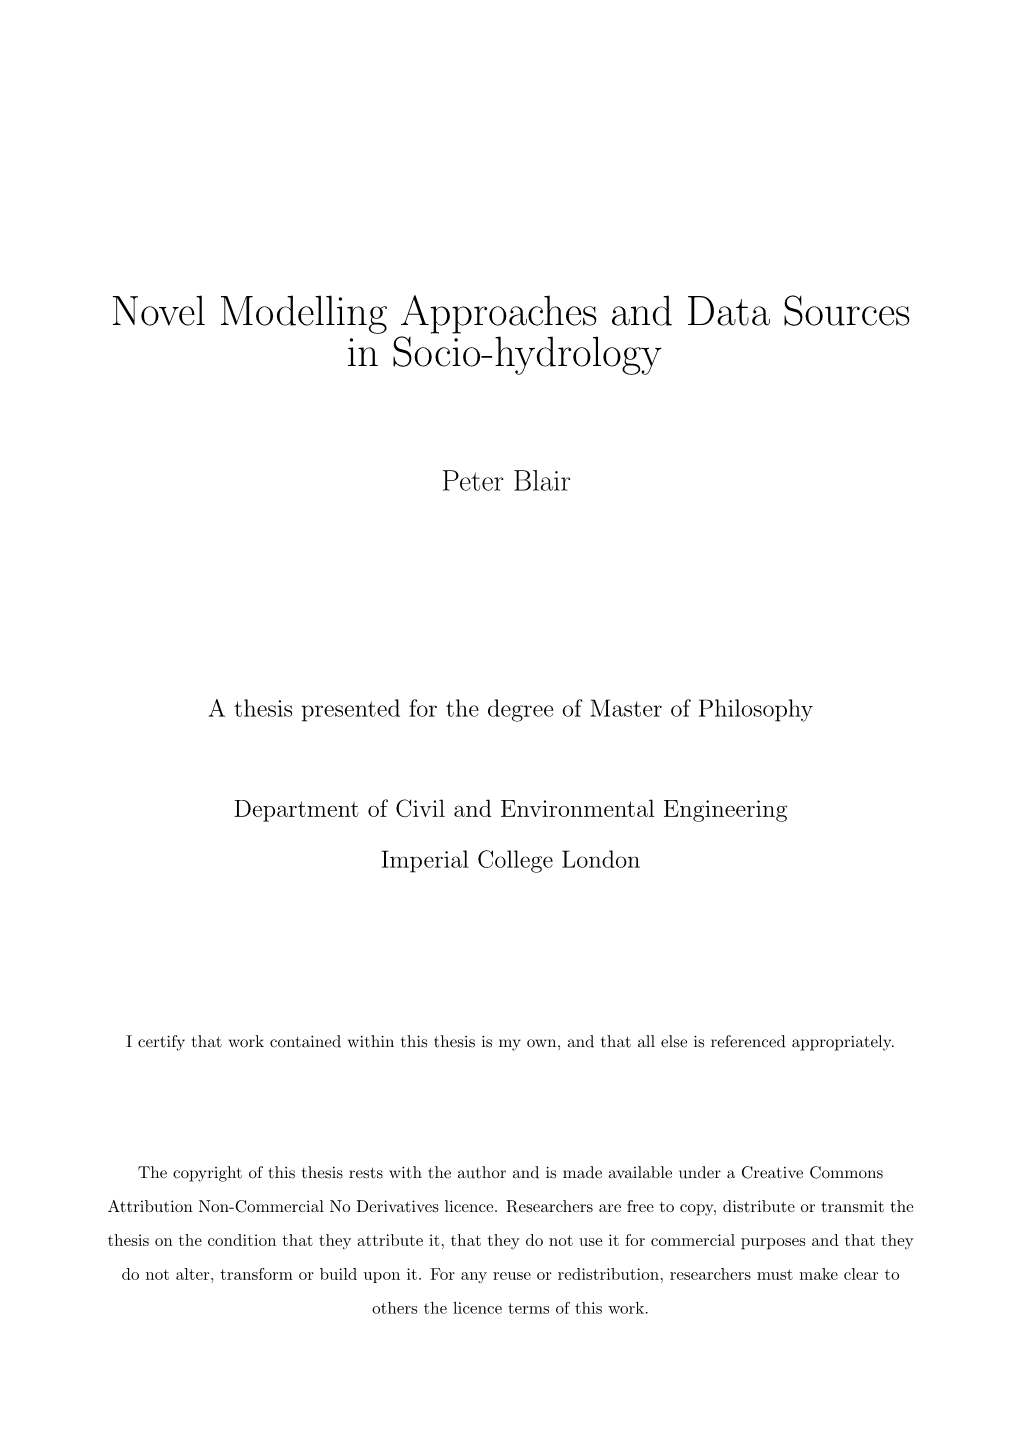 Novel Modelling Approaches and Data Sources in Socio-Hydrology